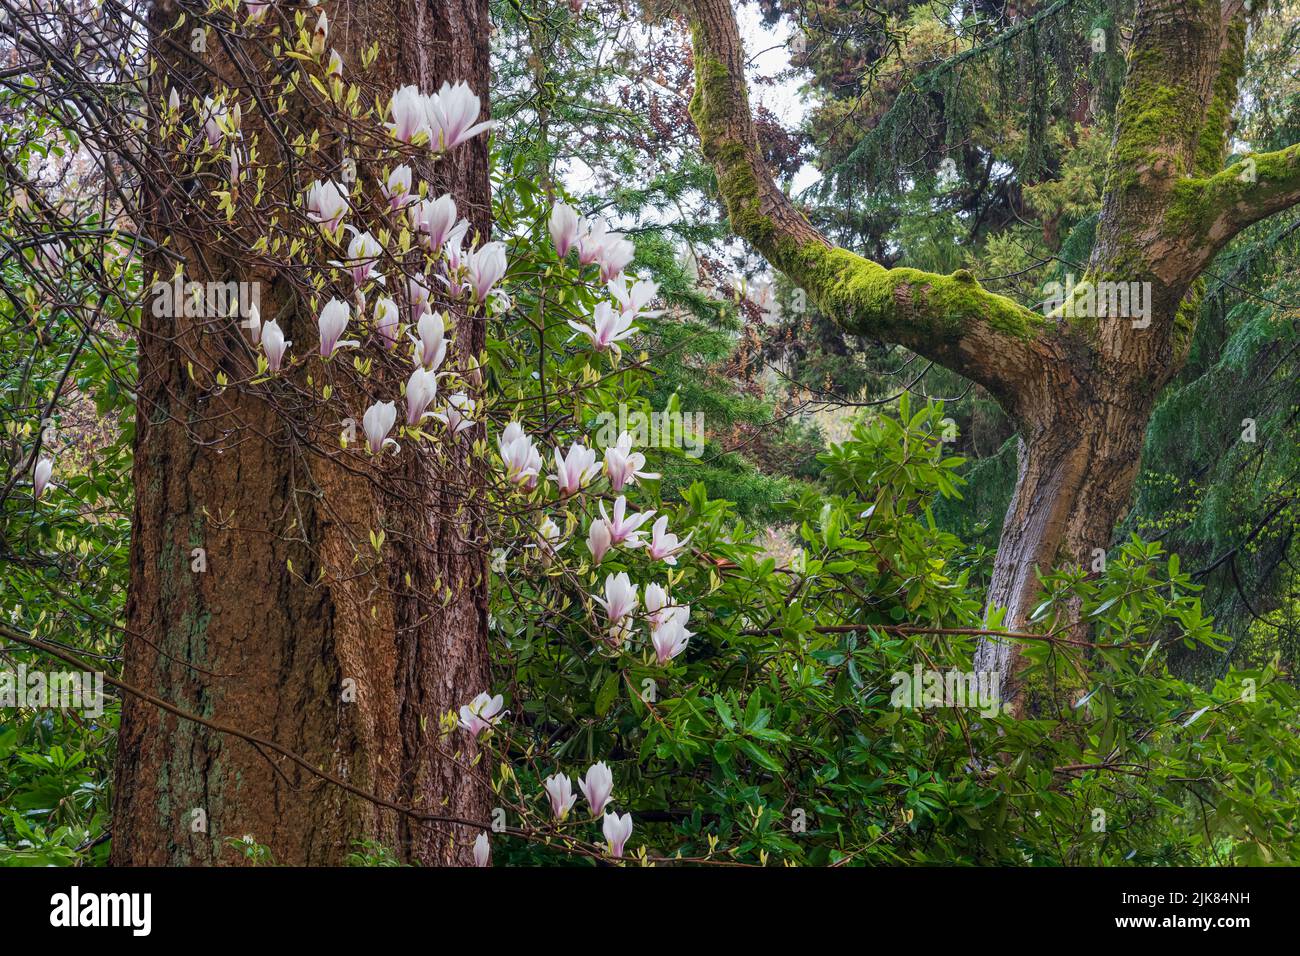 Magnolia blossoms and large redwood trees in the forest of Stanley Park, Vancouver, British Columbia, Canada. Stock Photo